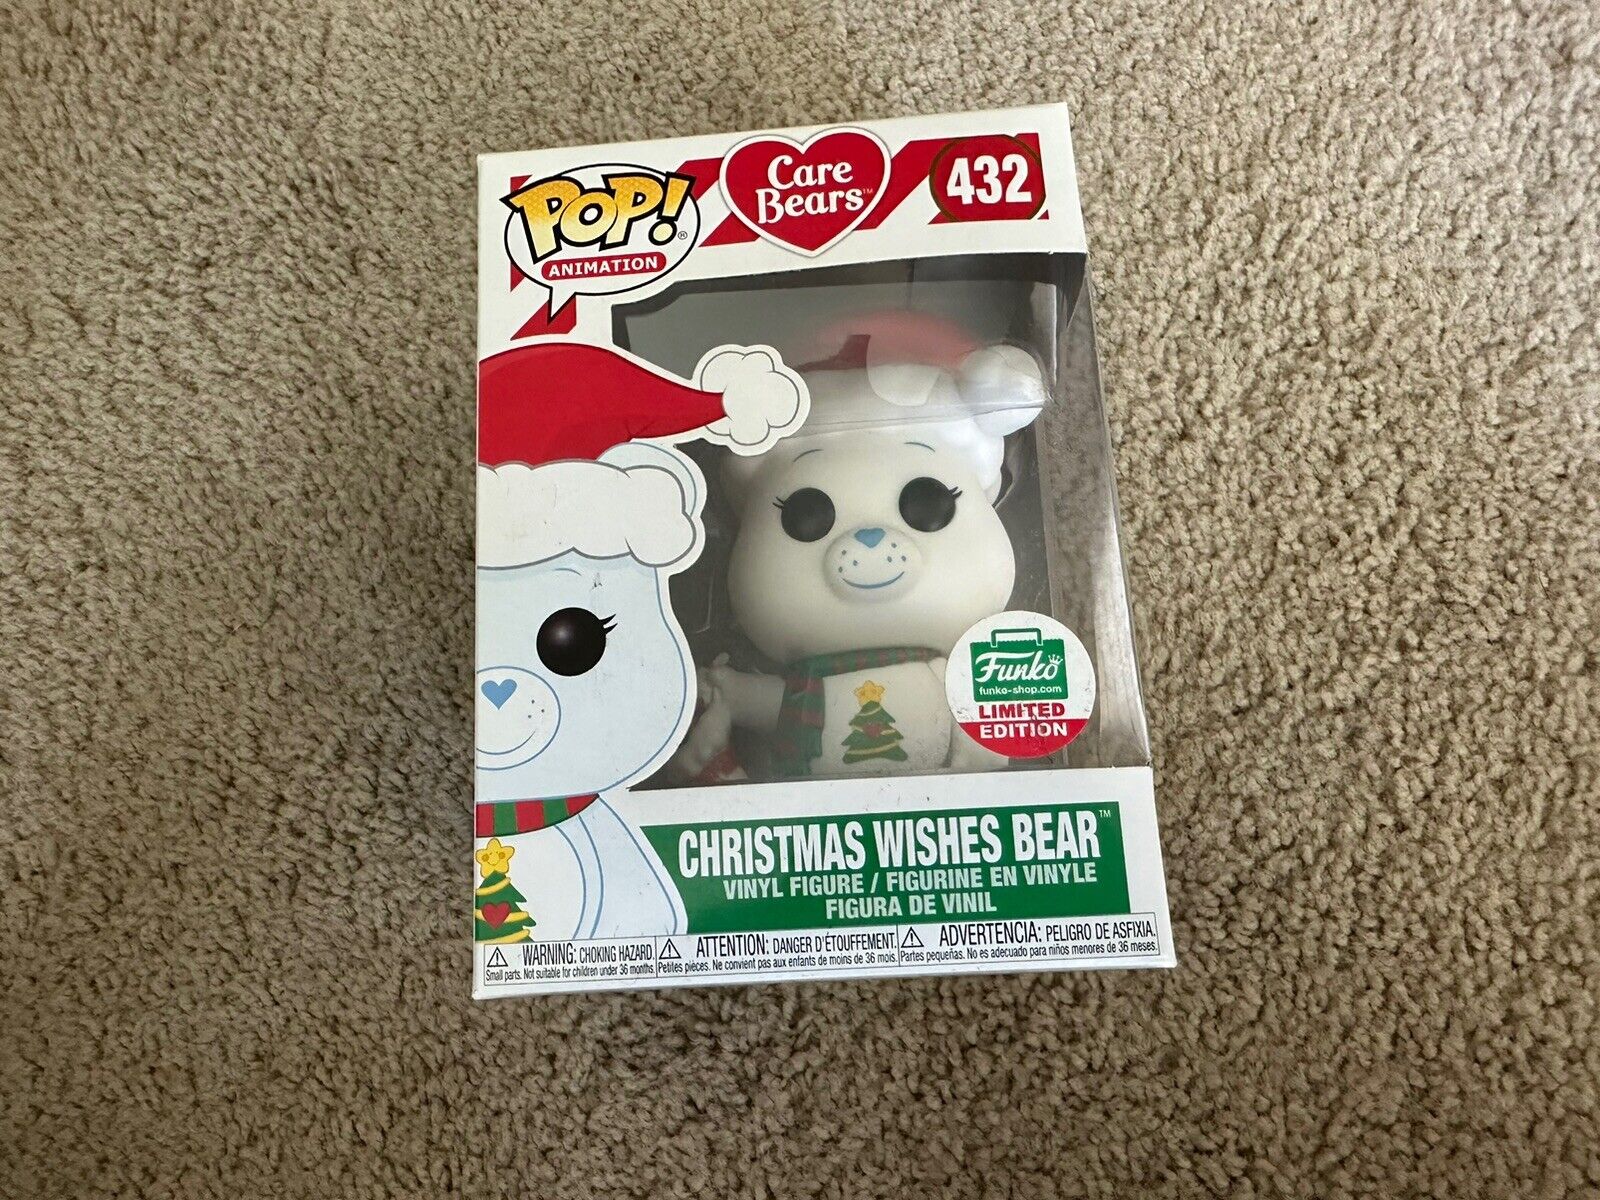 Christmas Wishes Bear Care Bears Funko Shop Pop Animation Holiday Exclusive 432